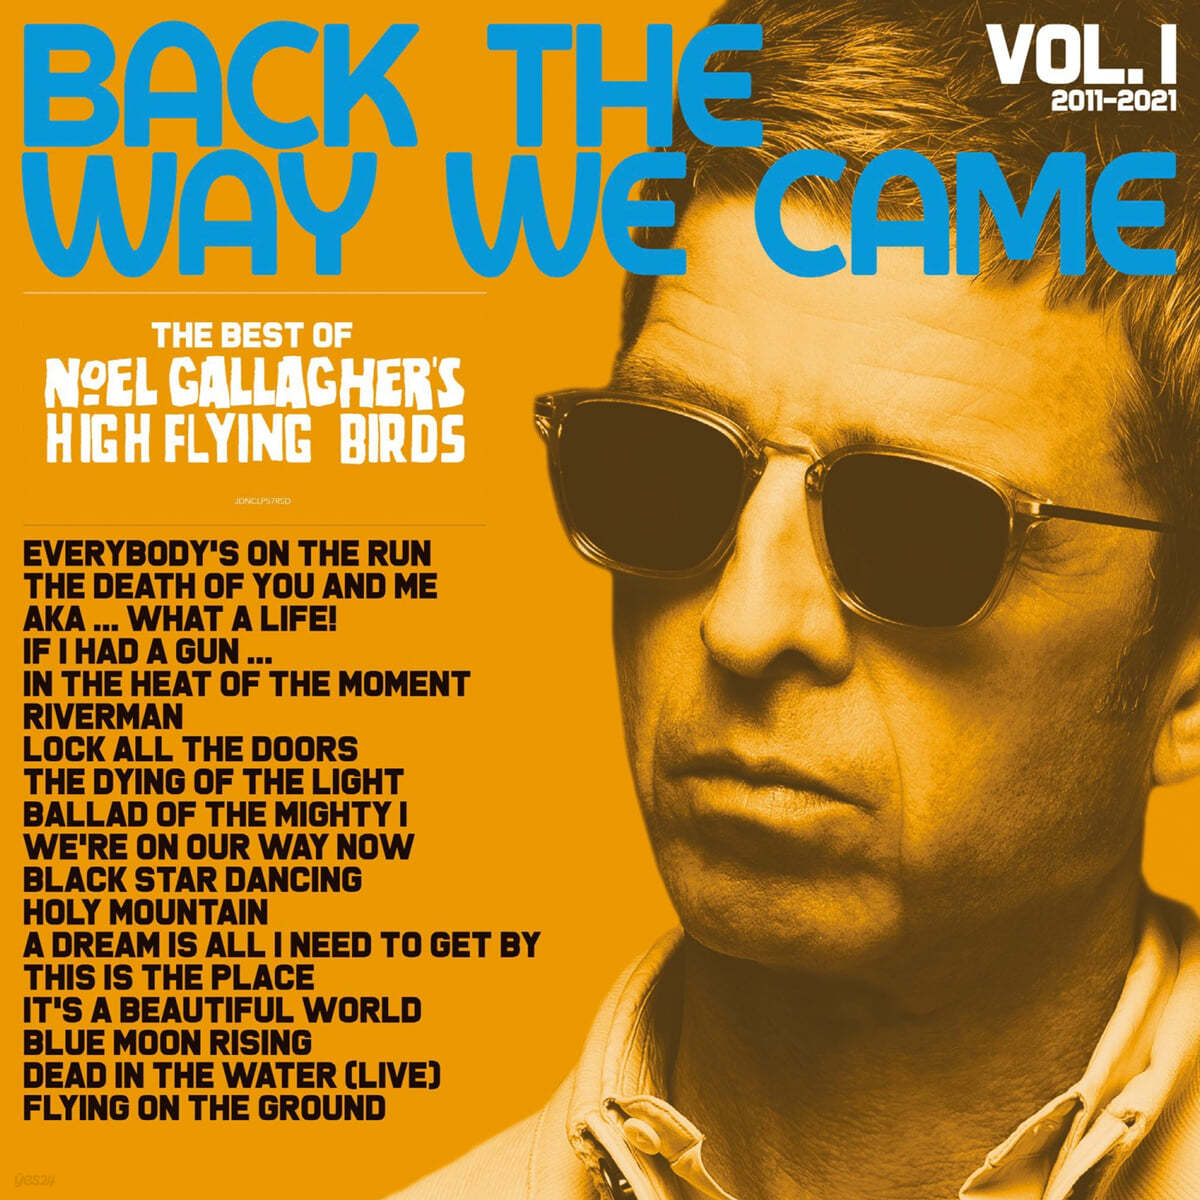 Noel Gallagher's High Flying Birds (노엘 갤러거 하이 플라잉 버드) - Back The Way We Came: Vol. 1 (2011-2021) 